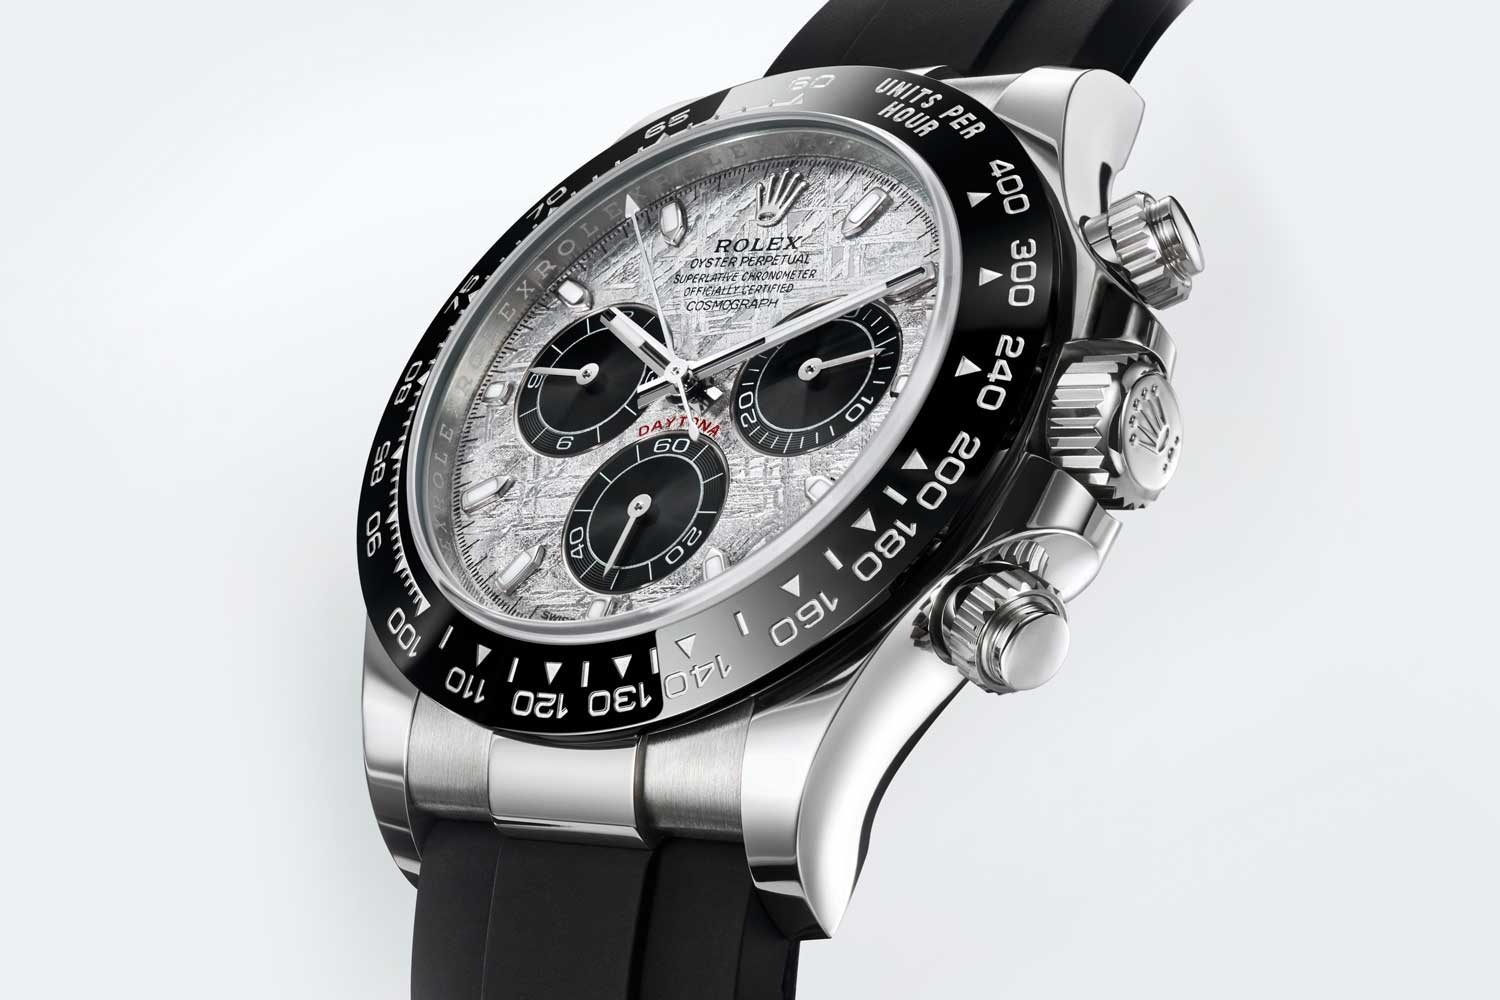 The timeless Oyster Perpetual Cosmograph Daytona in 18 ct white gold with a meteorite dial and an Oysterflex bracelet